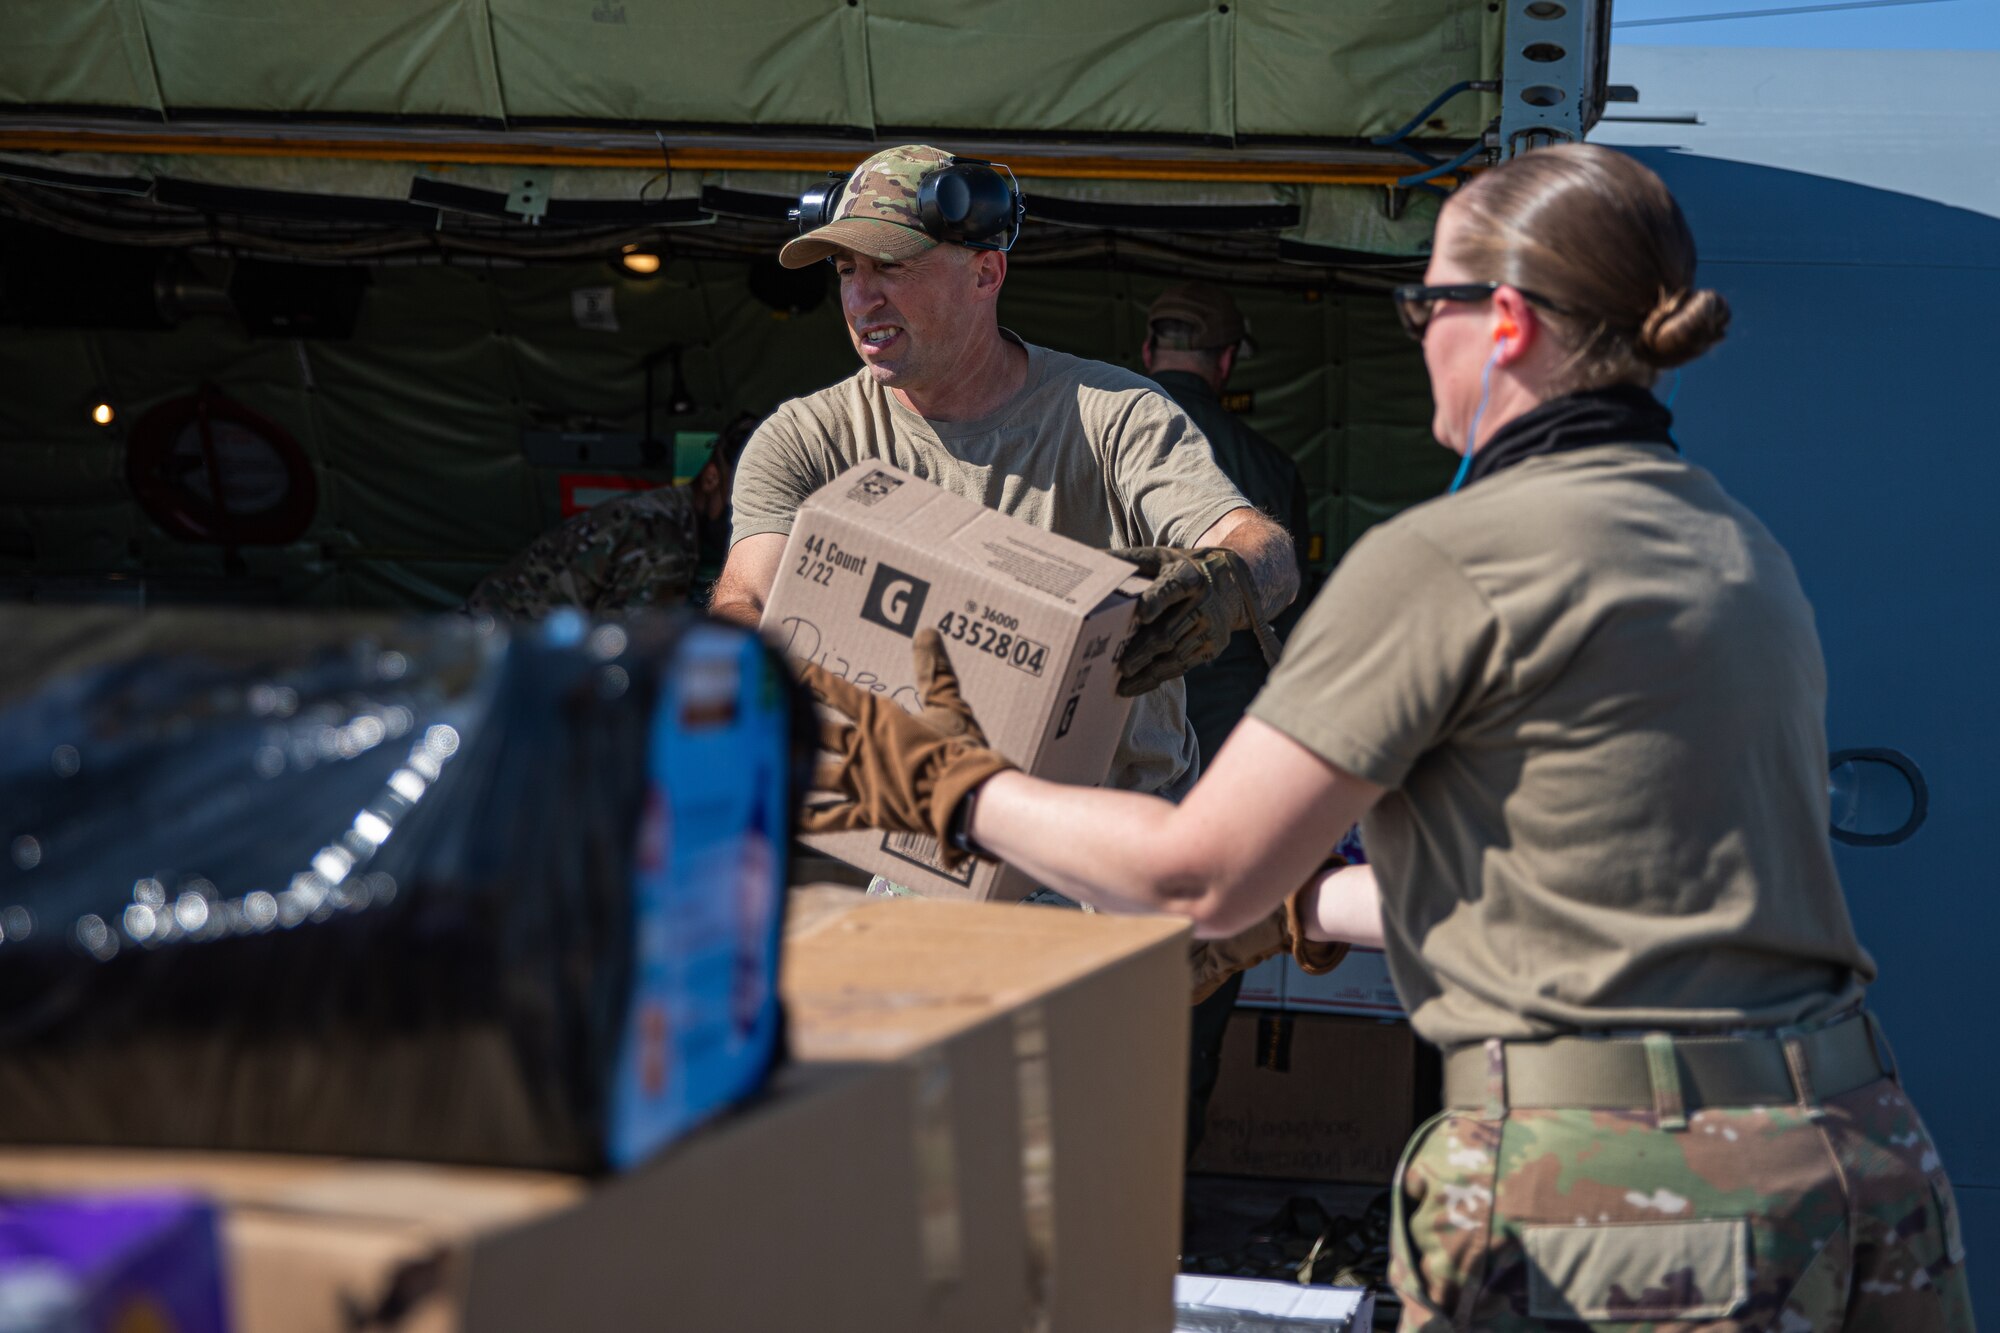 Airmen from Fairchild Air Force Base, Washington, unload donations off a KC-135 Stratotanker in support of Operation Allies Welcome on Holloman Air Force Base, New Mexico, Sept. 17, 2021. The Department of Defense, through U.S. Northern Command, and in support of the Department of State and Department of Homeland Security, is providing transportation, temporary housing, medical screening, and general support for at least 50,000 Afghan evacuees at suitable facilities, in permanent or temporary structures, as quickly as possible. This initiative provides Afghan evacuees essential support at secure locations outside Afghanistan. (U.S. Army photo by Pfc. Anthony Sanchez)